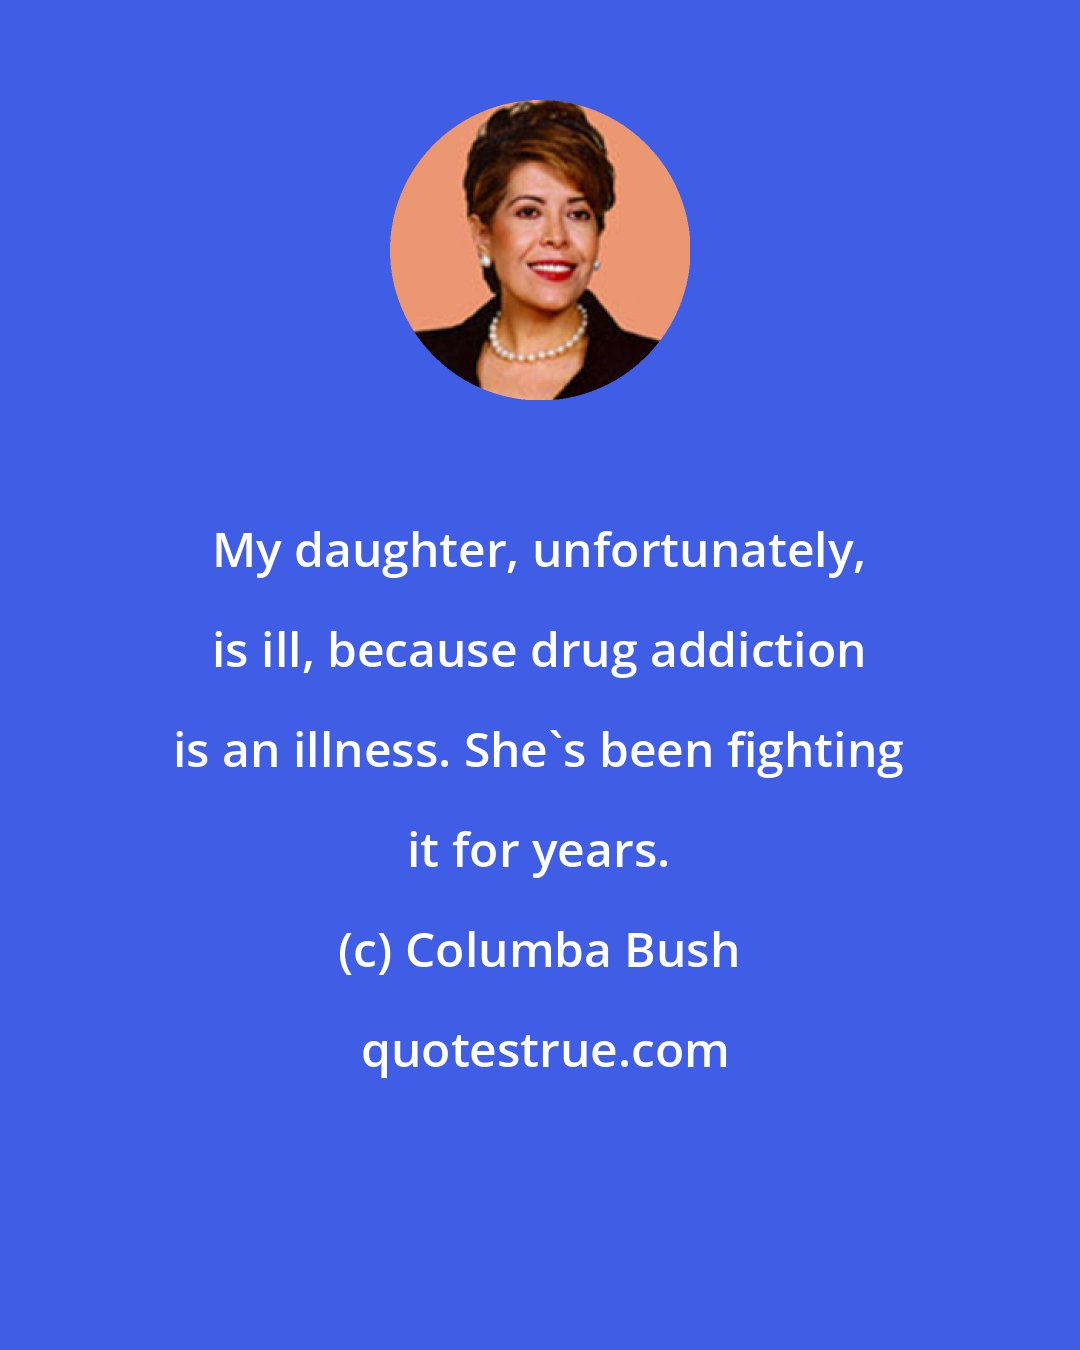 Columba Bush: My daughter, unfortunately, is ill, because drug addiction is an illness. She's been fighting it for years.